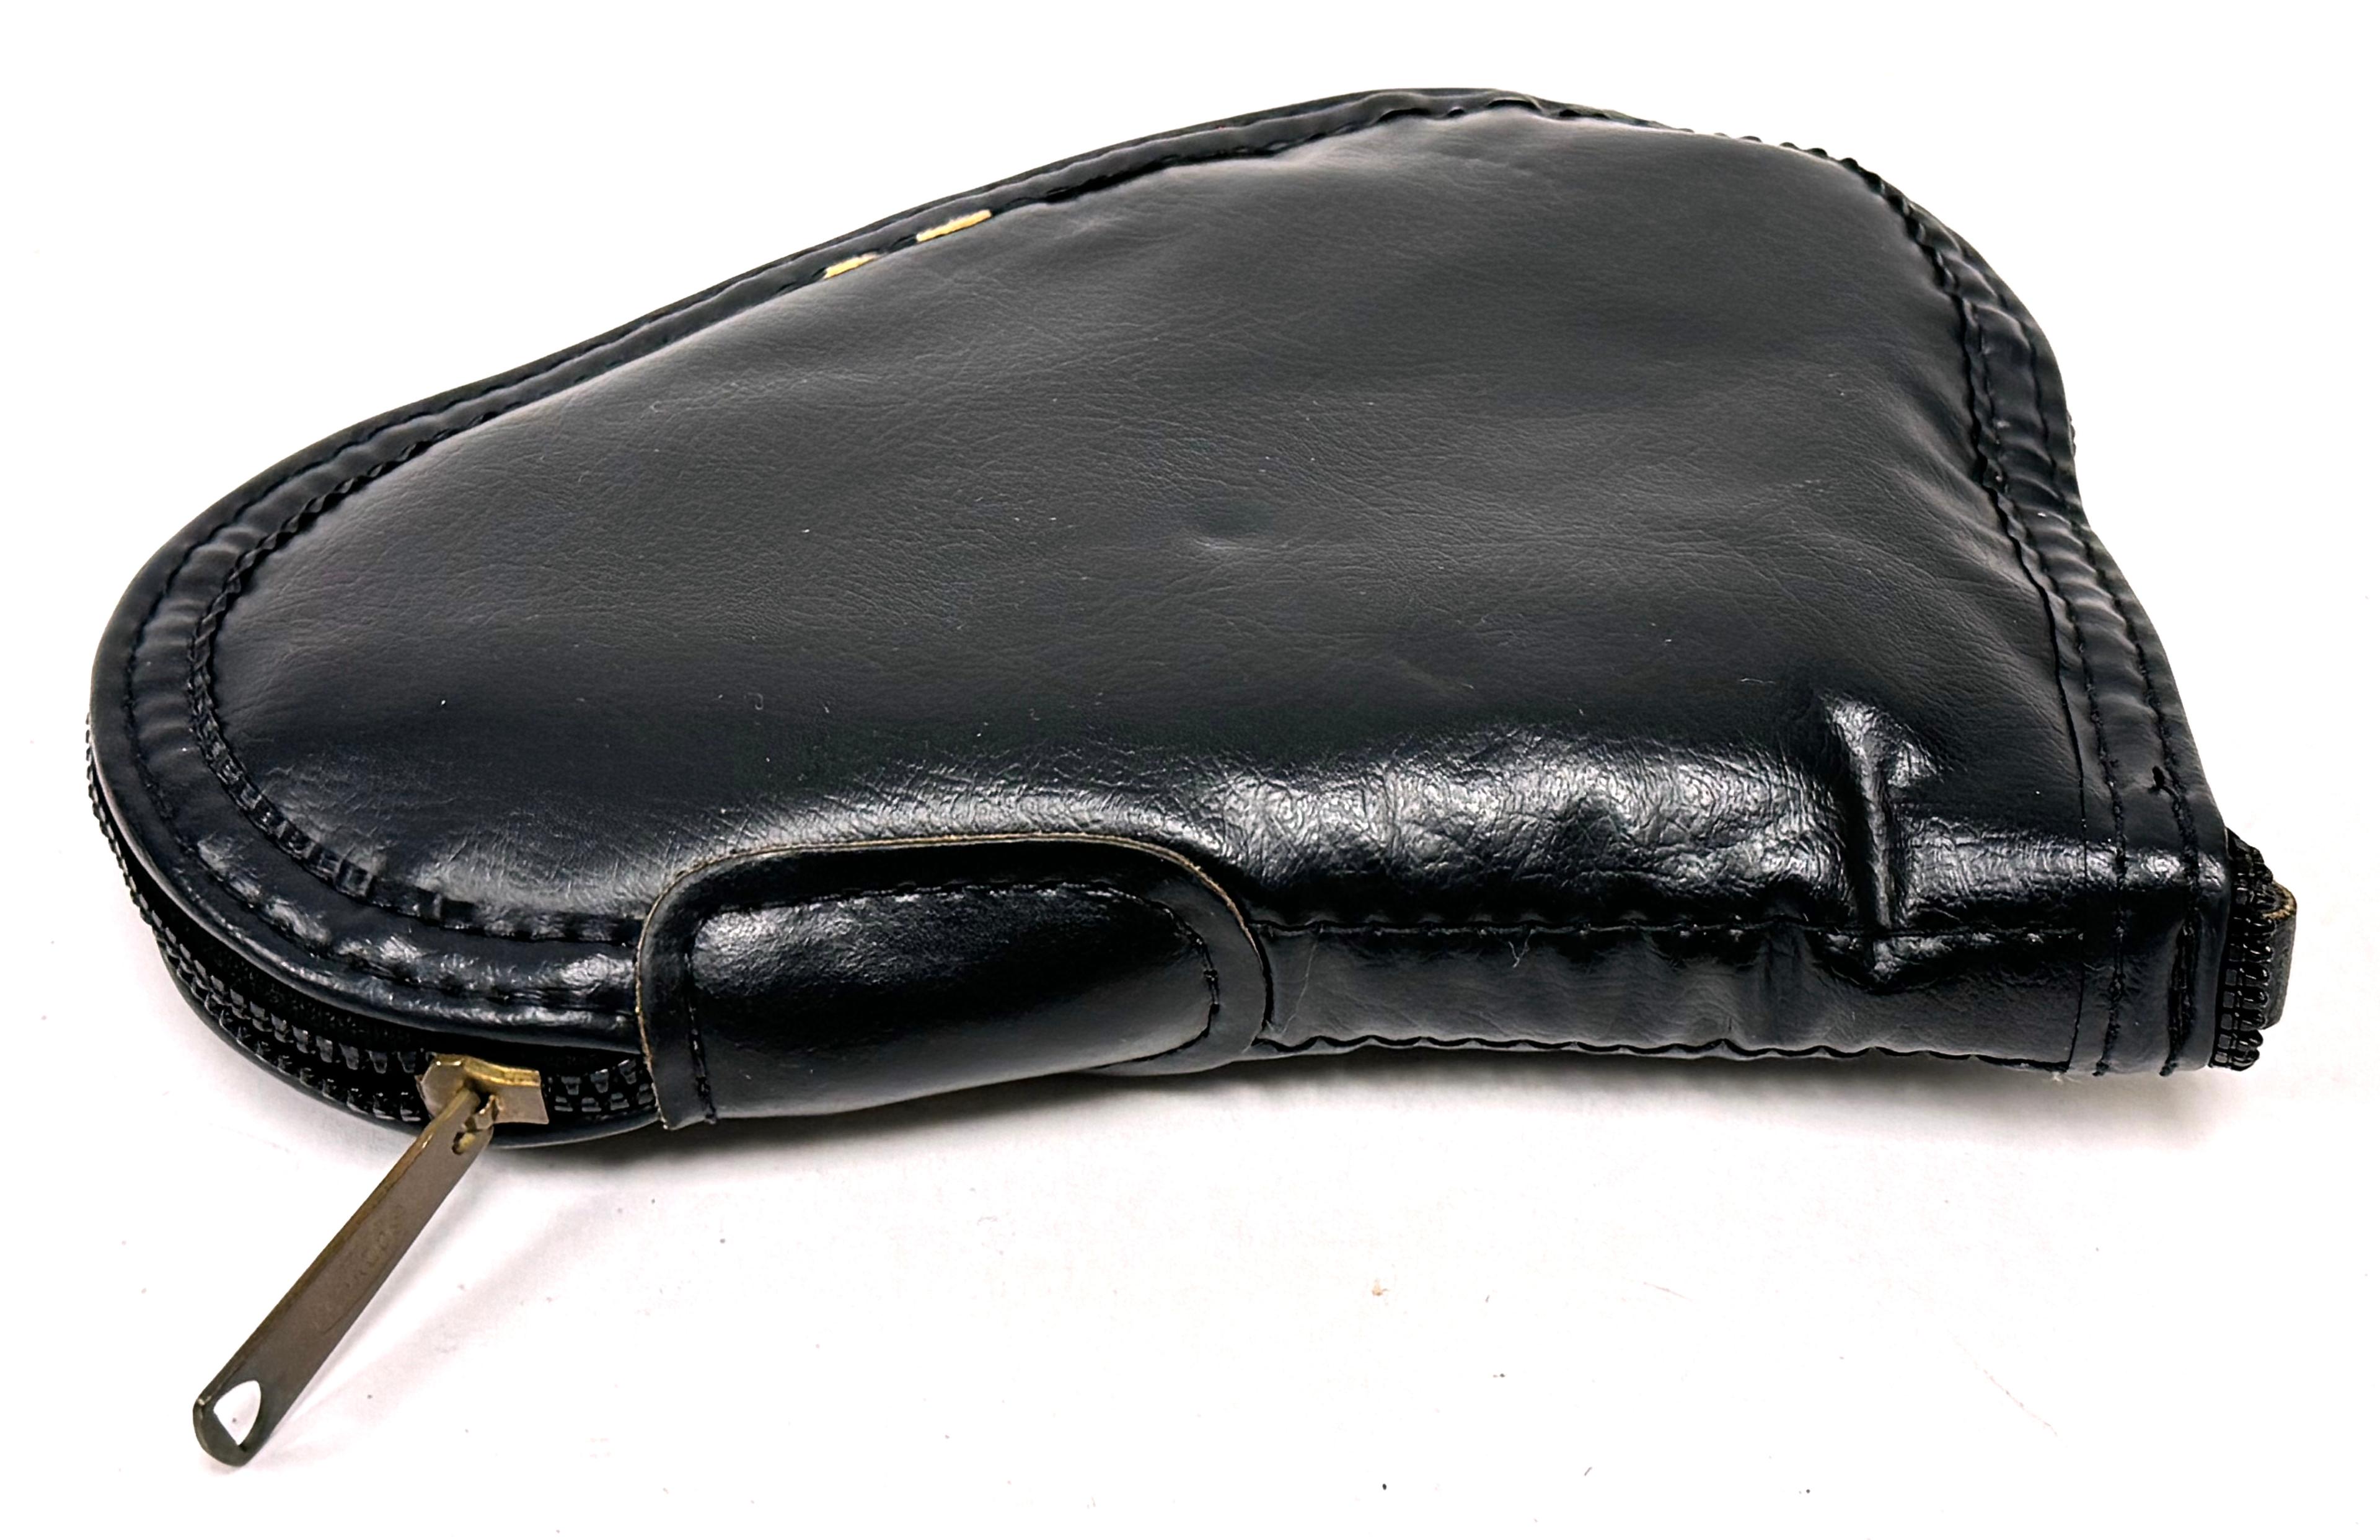 Factory Browning Black Leather Handgun Soft Case by Scovill